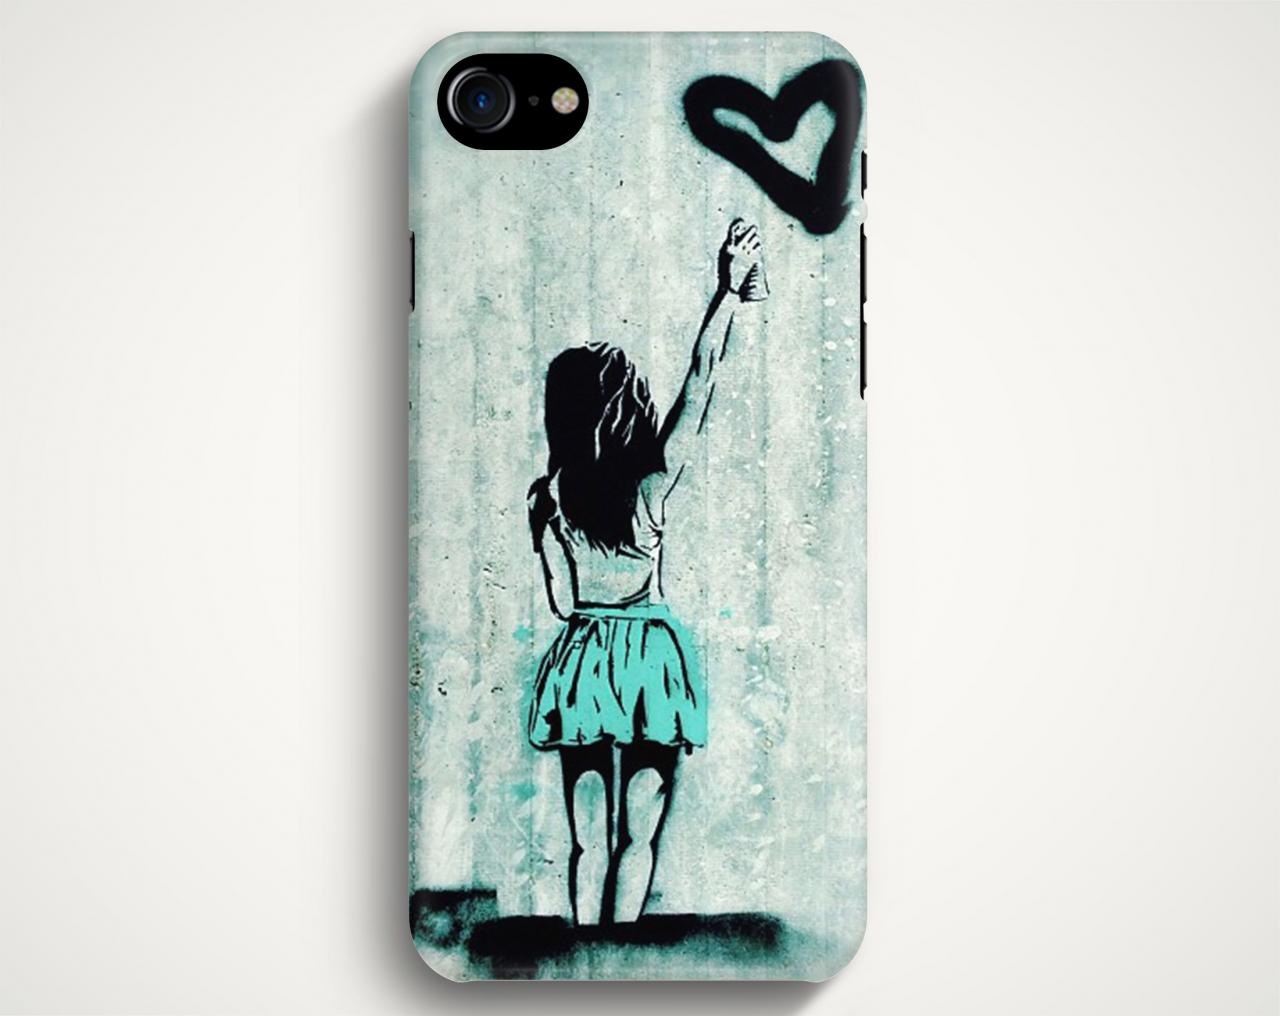 Girl Graffitti Heart Case For Iphone 7 Iphone 7 Plus Samsung Galaxy S8 Galaxy S7 Galaxy A3 Galaxy A5 Galaxy A7 Lg G6 Lg G5 Htc 10